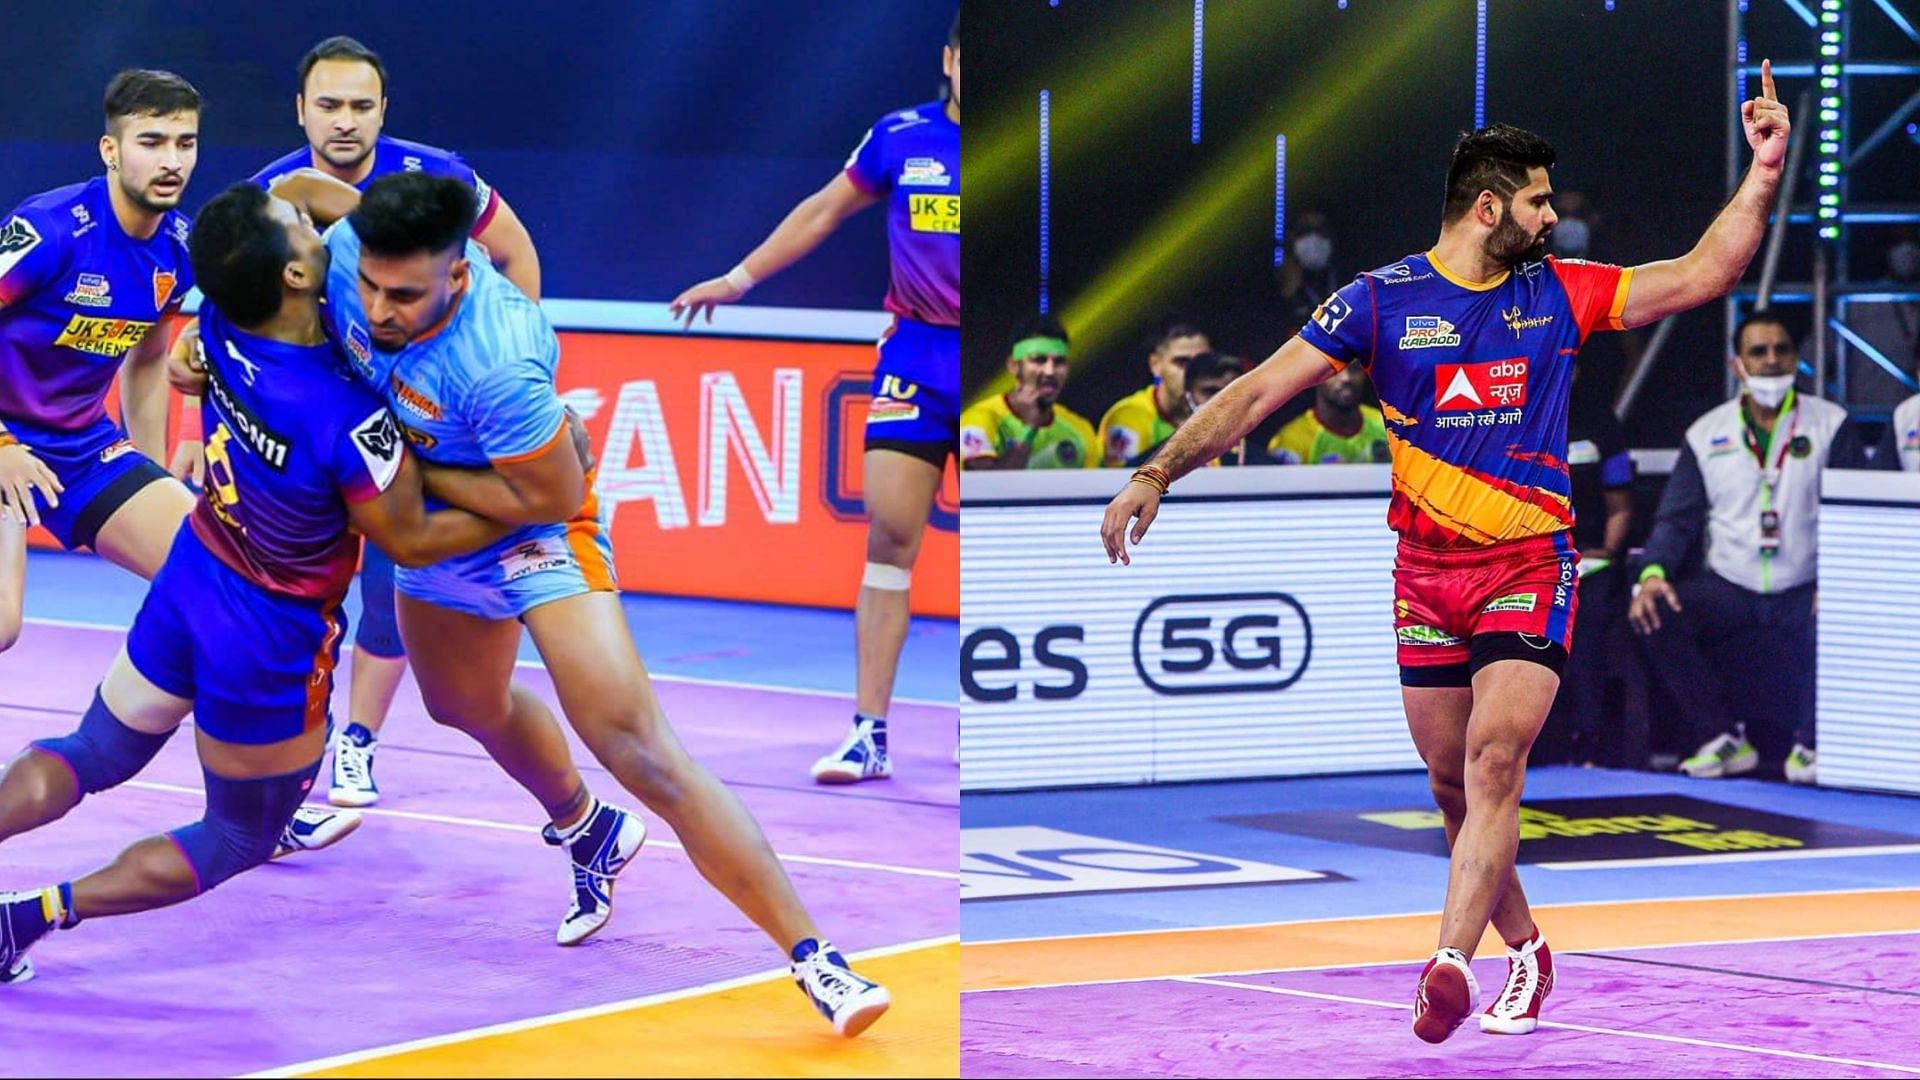 Maninder Singh and Pardeep Narwal were in action earlier tonight in Pro Kabaddi 2021 (Image: Instagram/Pro Kabaddi)